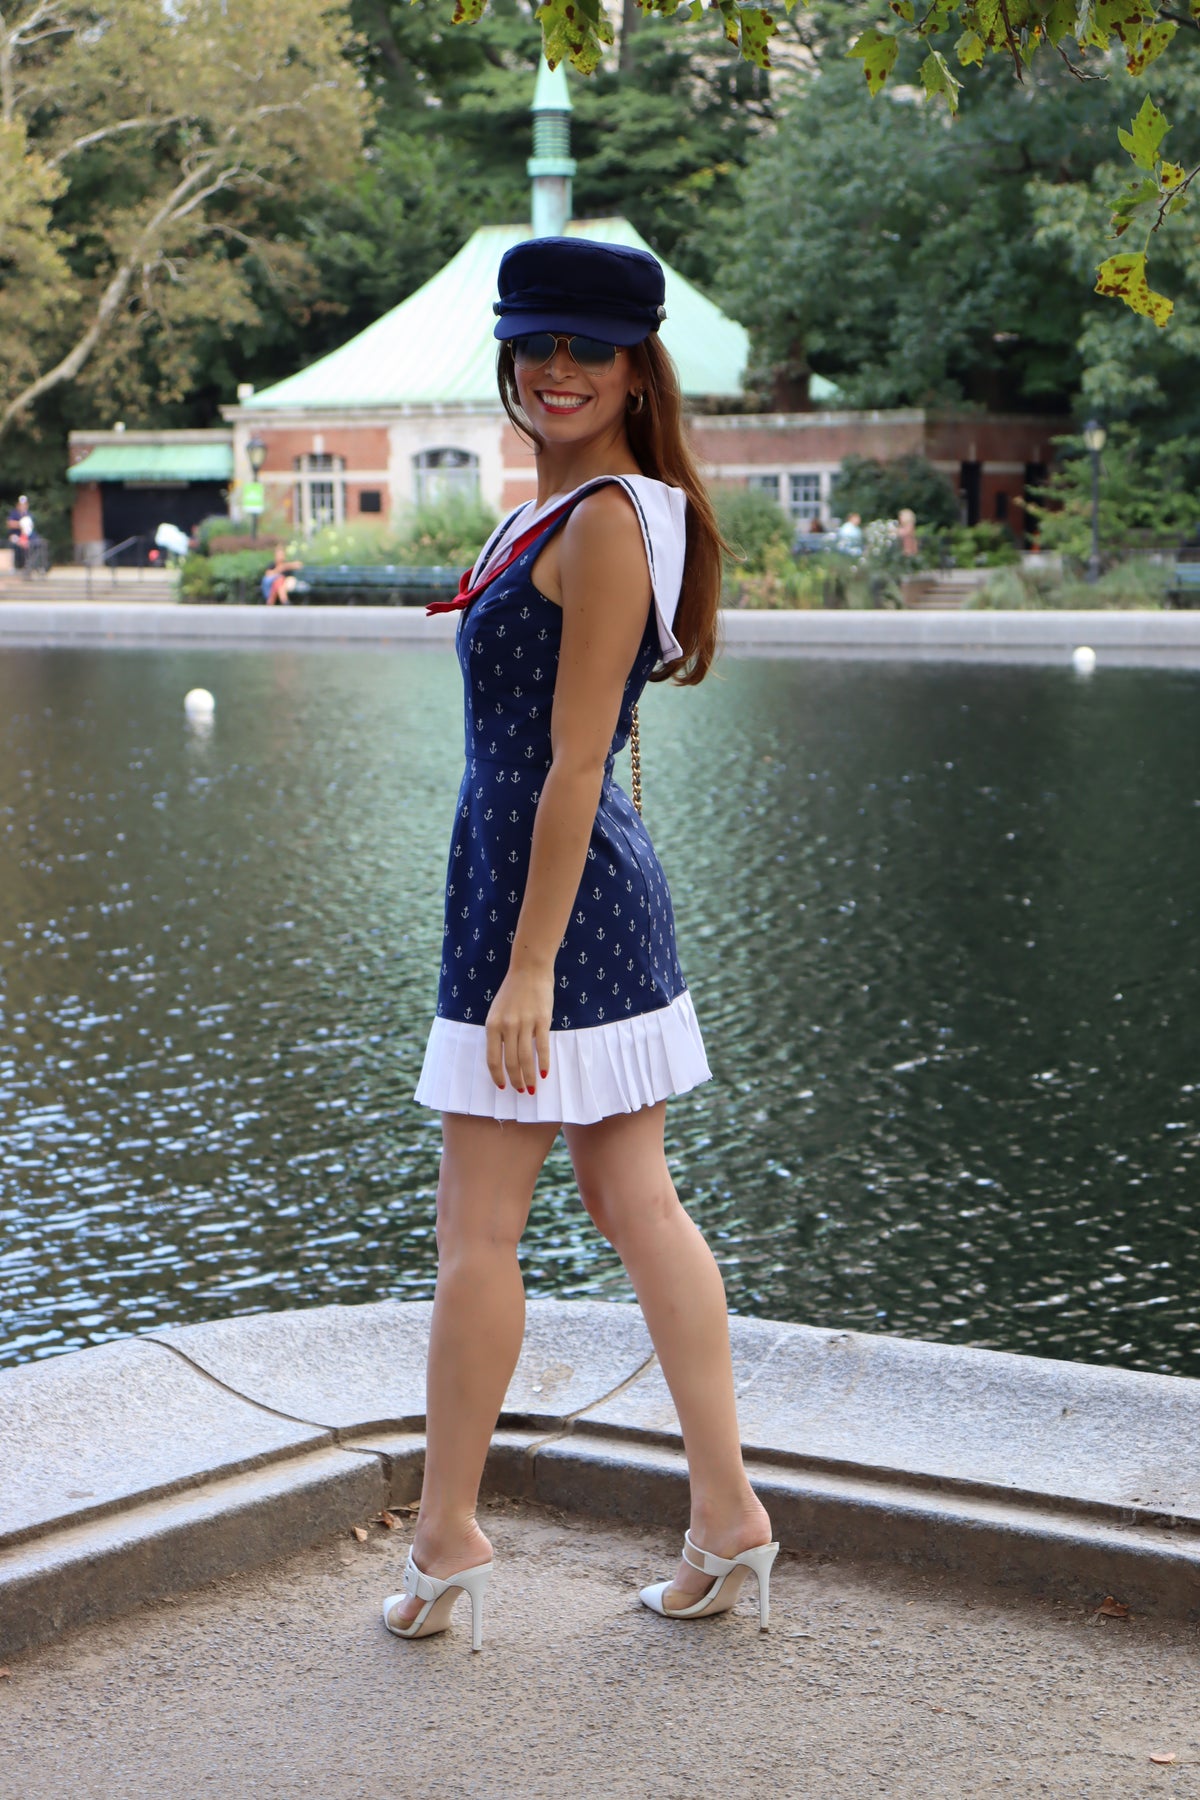 Model wearing classic sailor dress with white anchors on navy background print with ruffle at the bottom and a red bow, and a blue hat smiling.